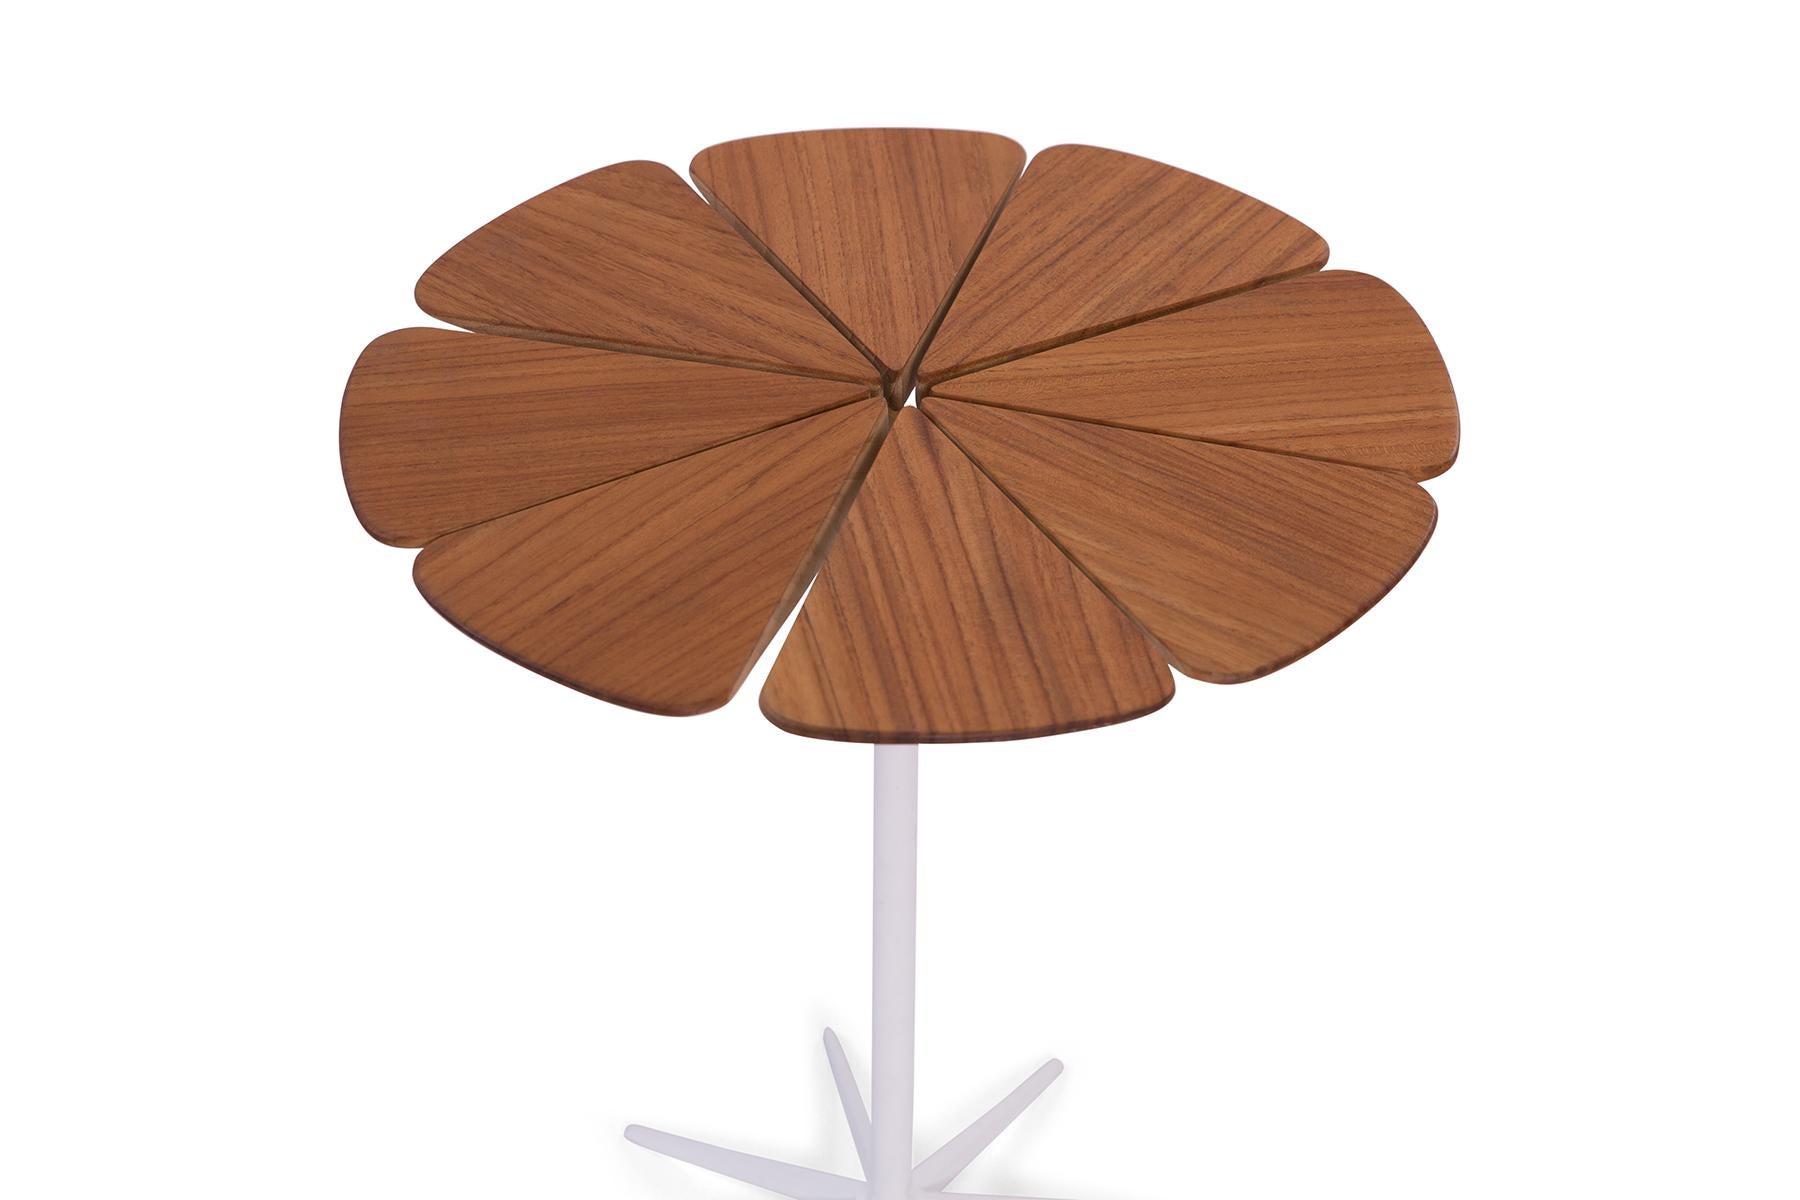 This iconic 1970s Knoll petal side table by Richard Shultz is the perfect way to add some midcentury whimsy to any room. The white aluminum base is powder coated and the eponymous petal top is teak.